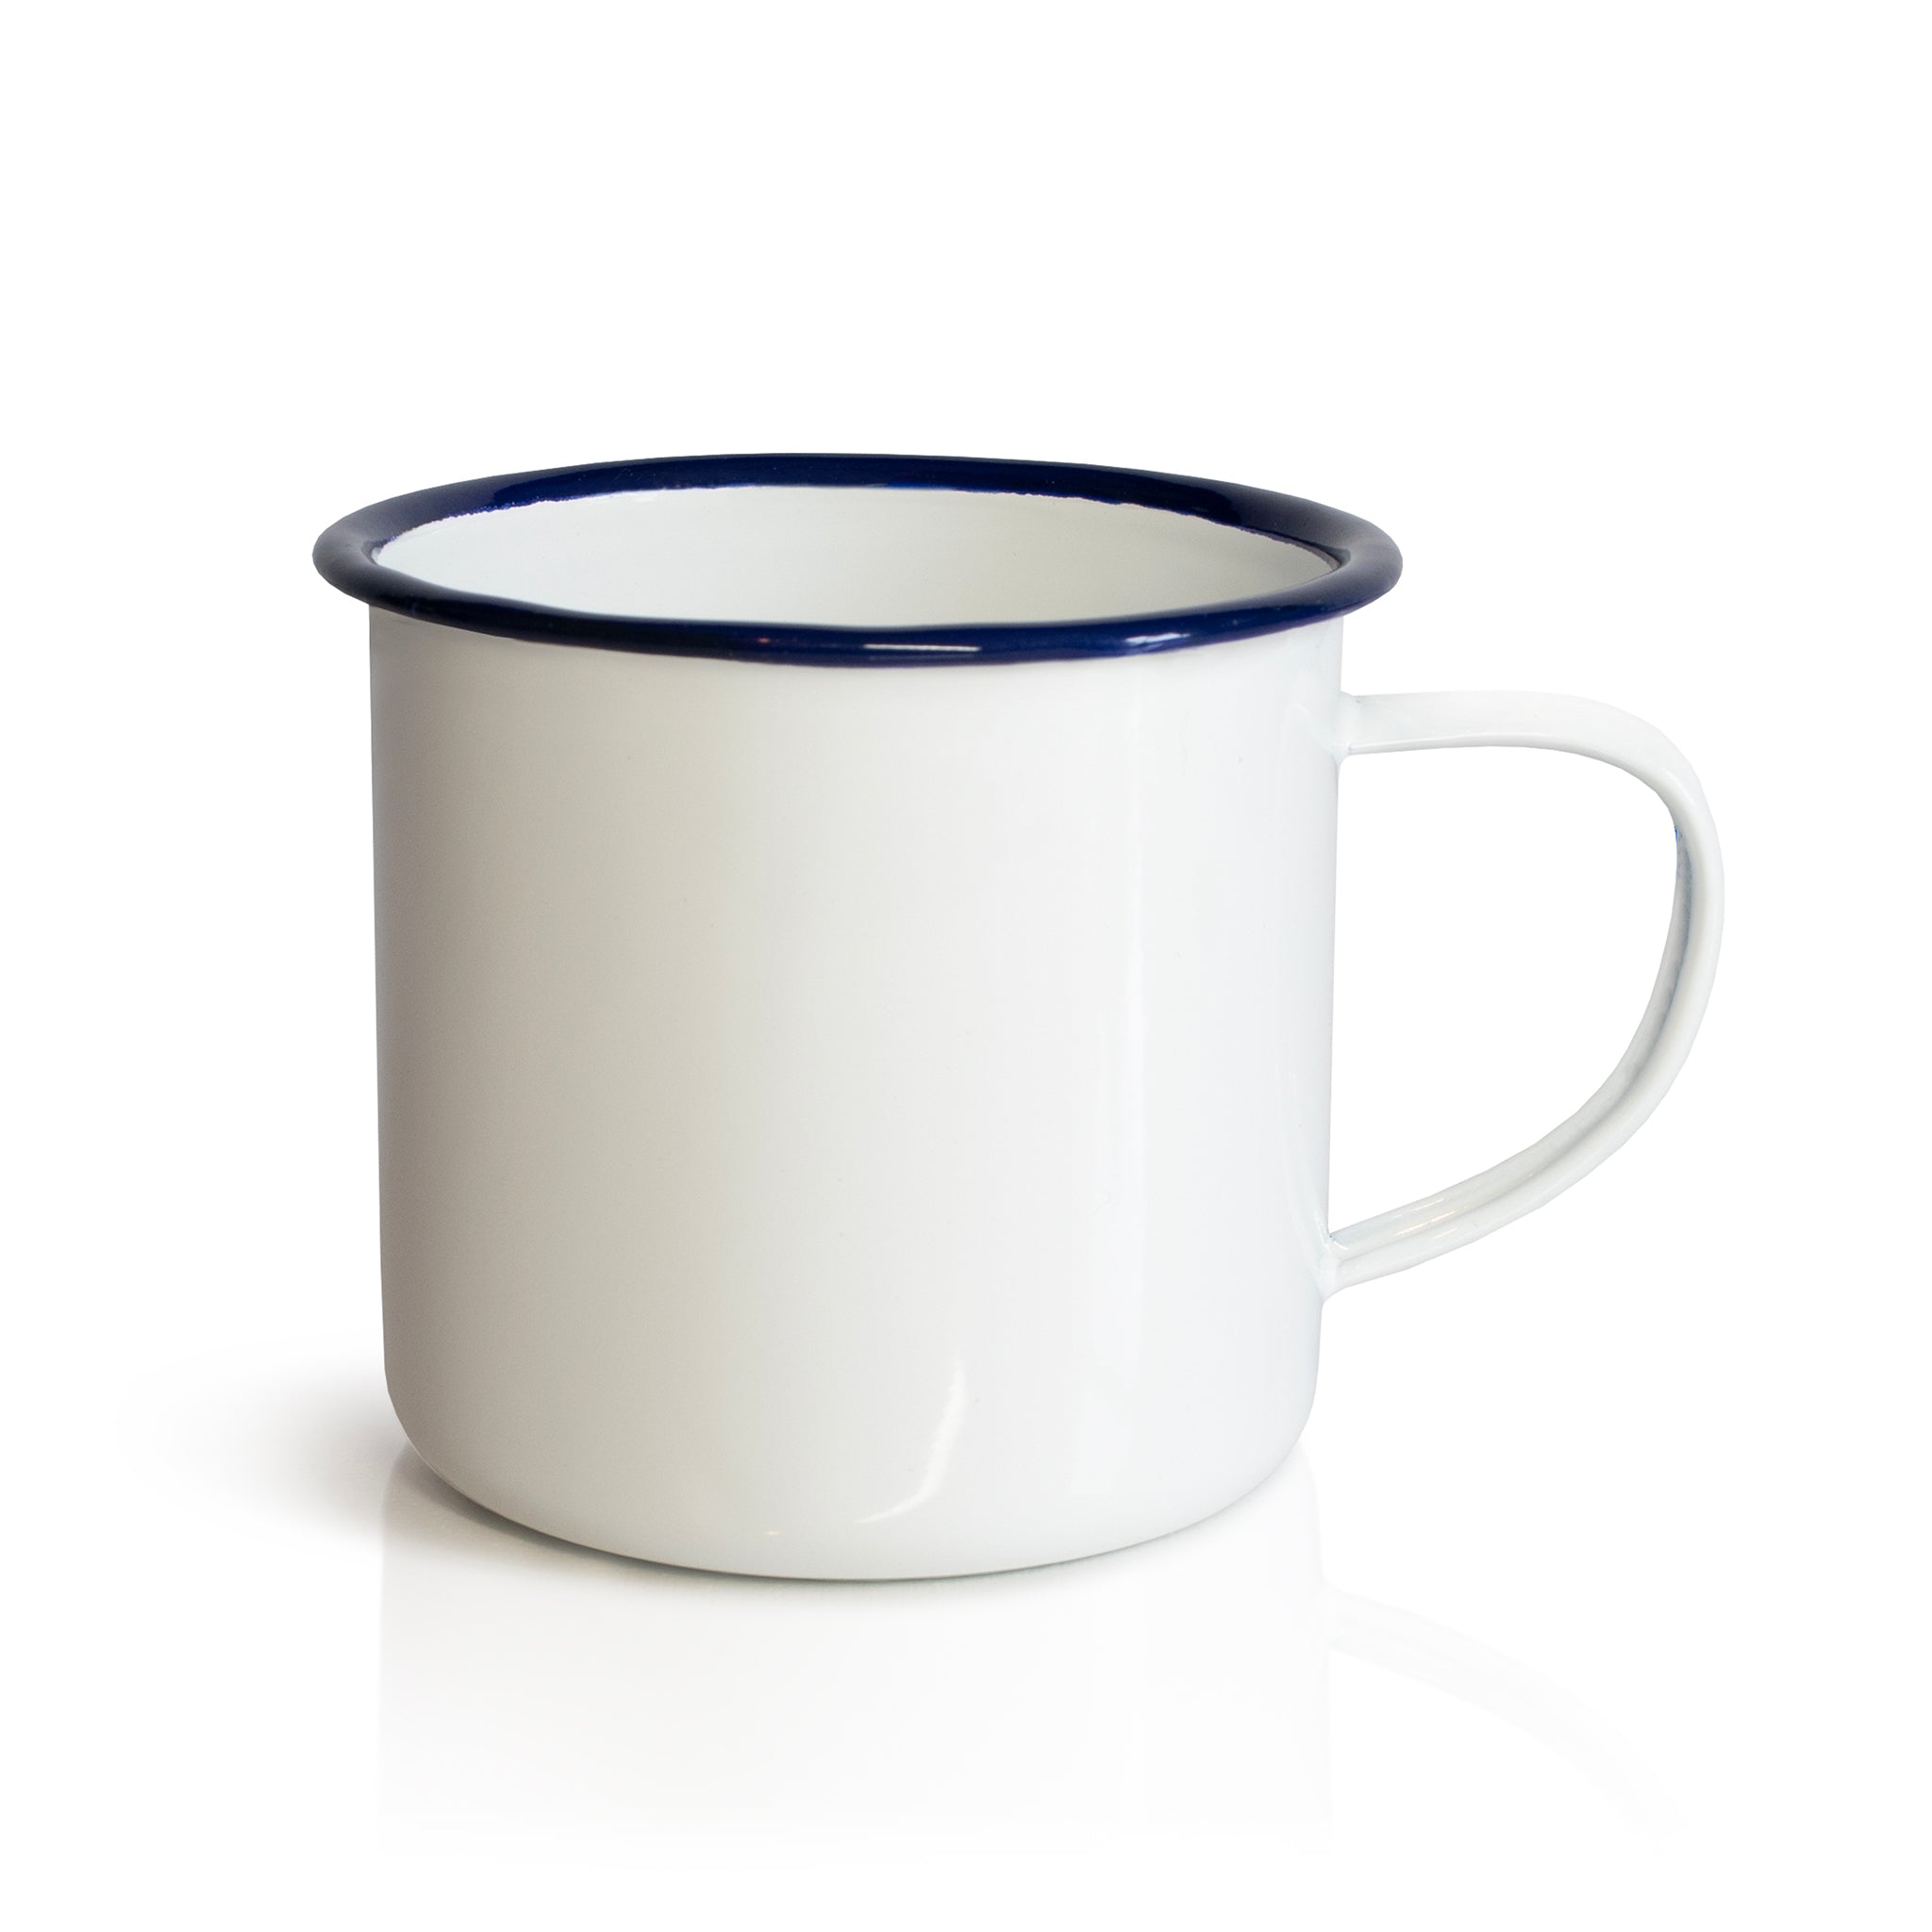 Enamel cup white with blue rim